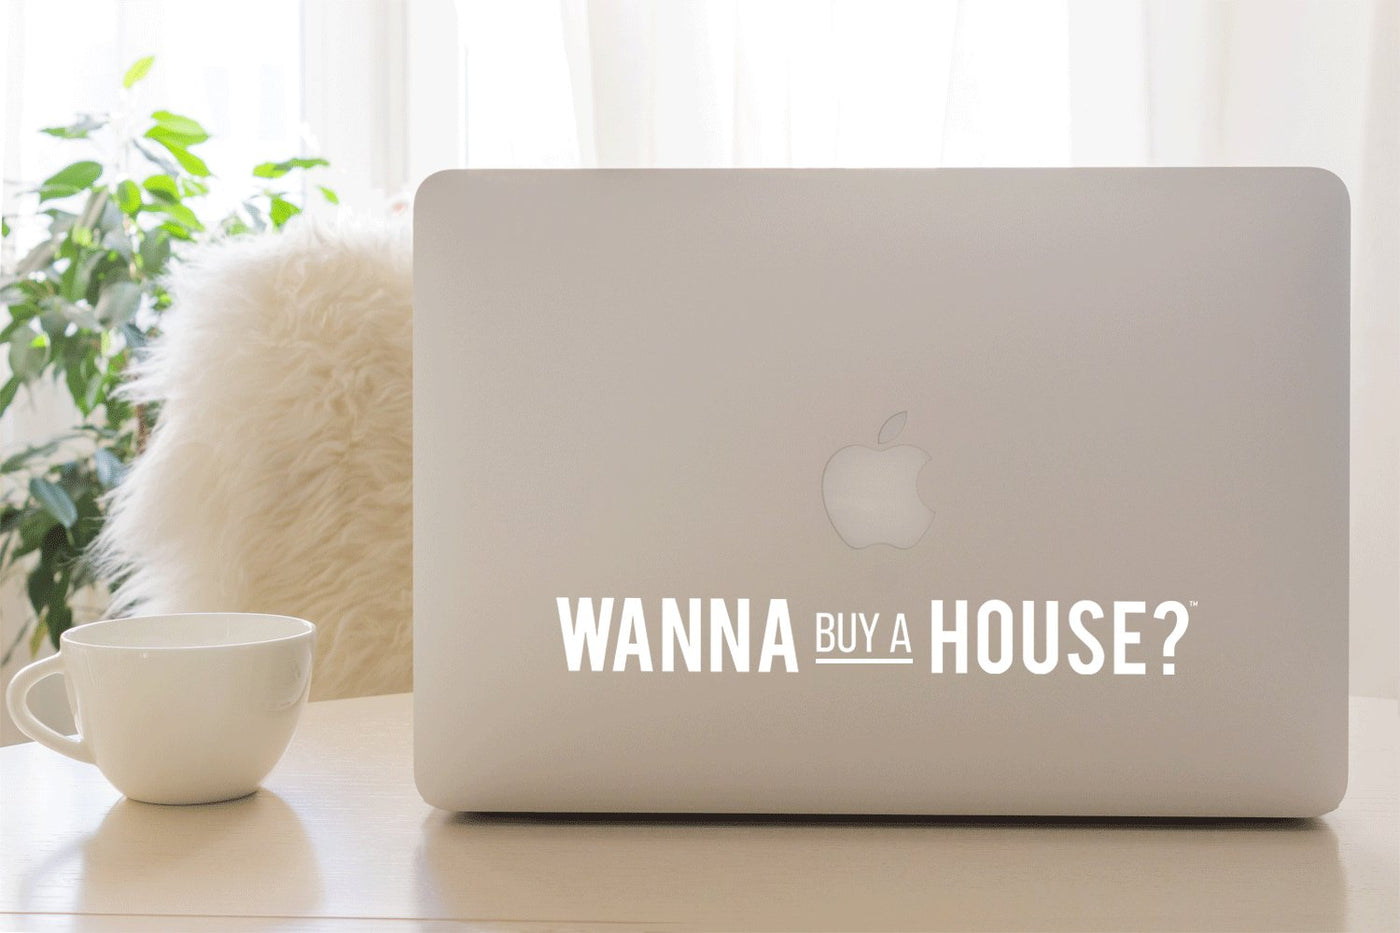 Wanna Buy a House?™ - White Vinyl Transfer Decal 9" - All Things Real Estate